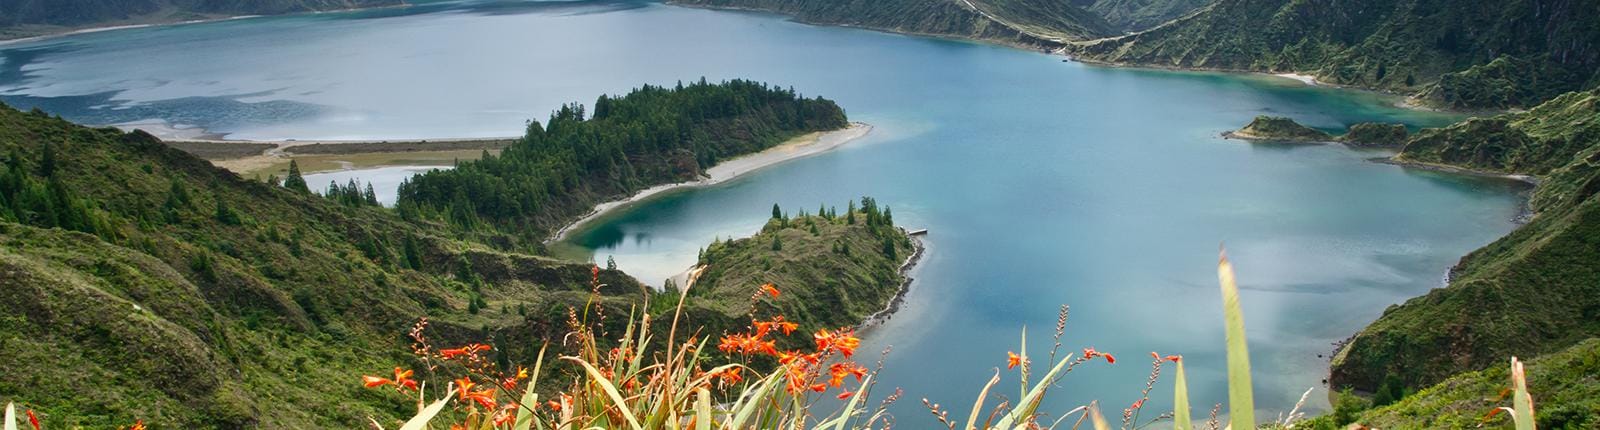 Bright blue waters in the volcanic crater of the Lake of Fire in Ponta Delgada, Portugal